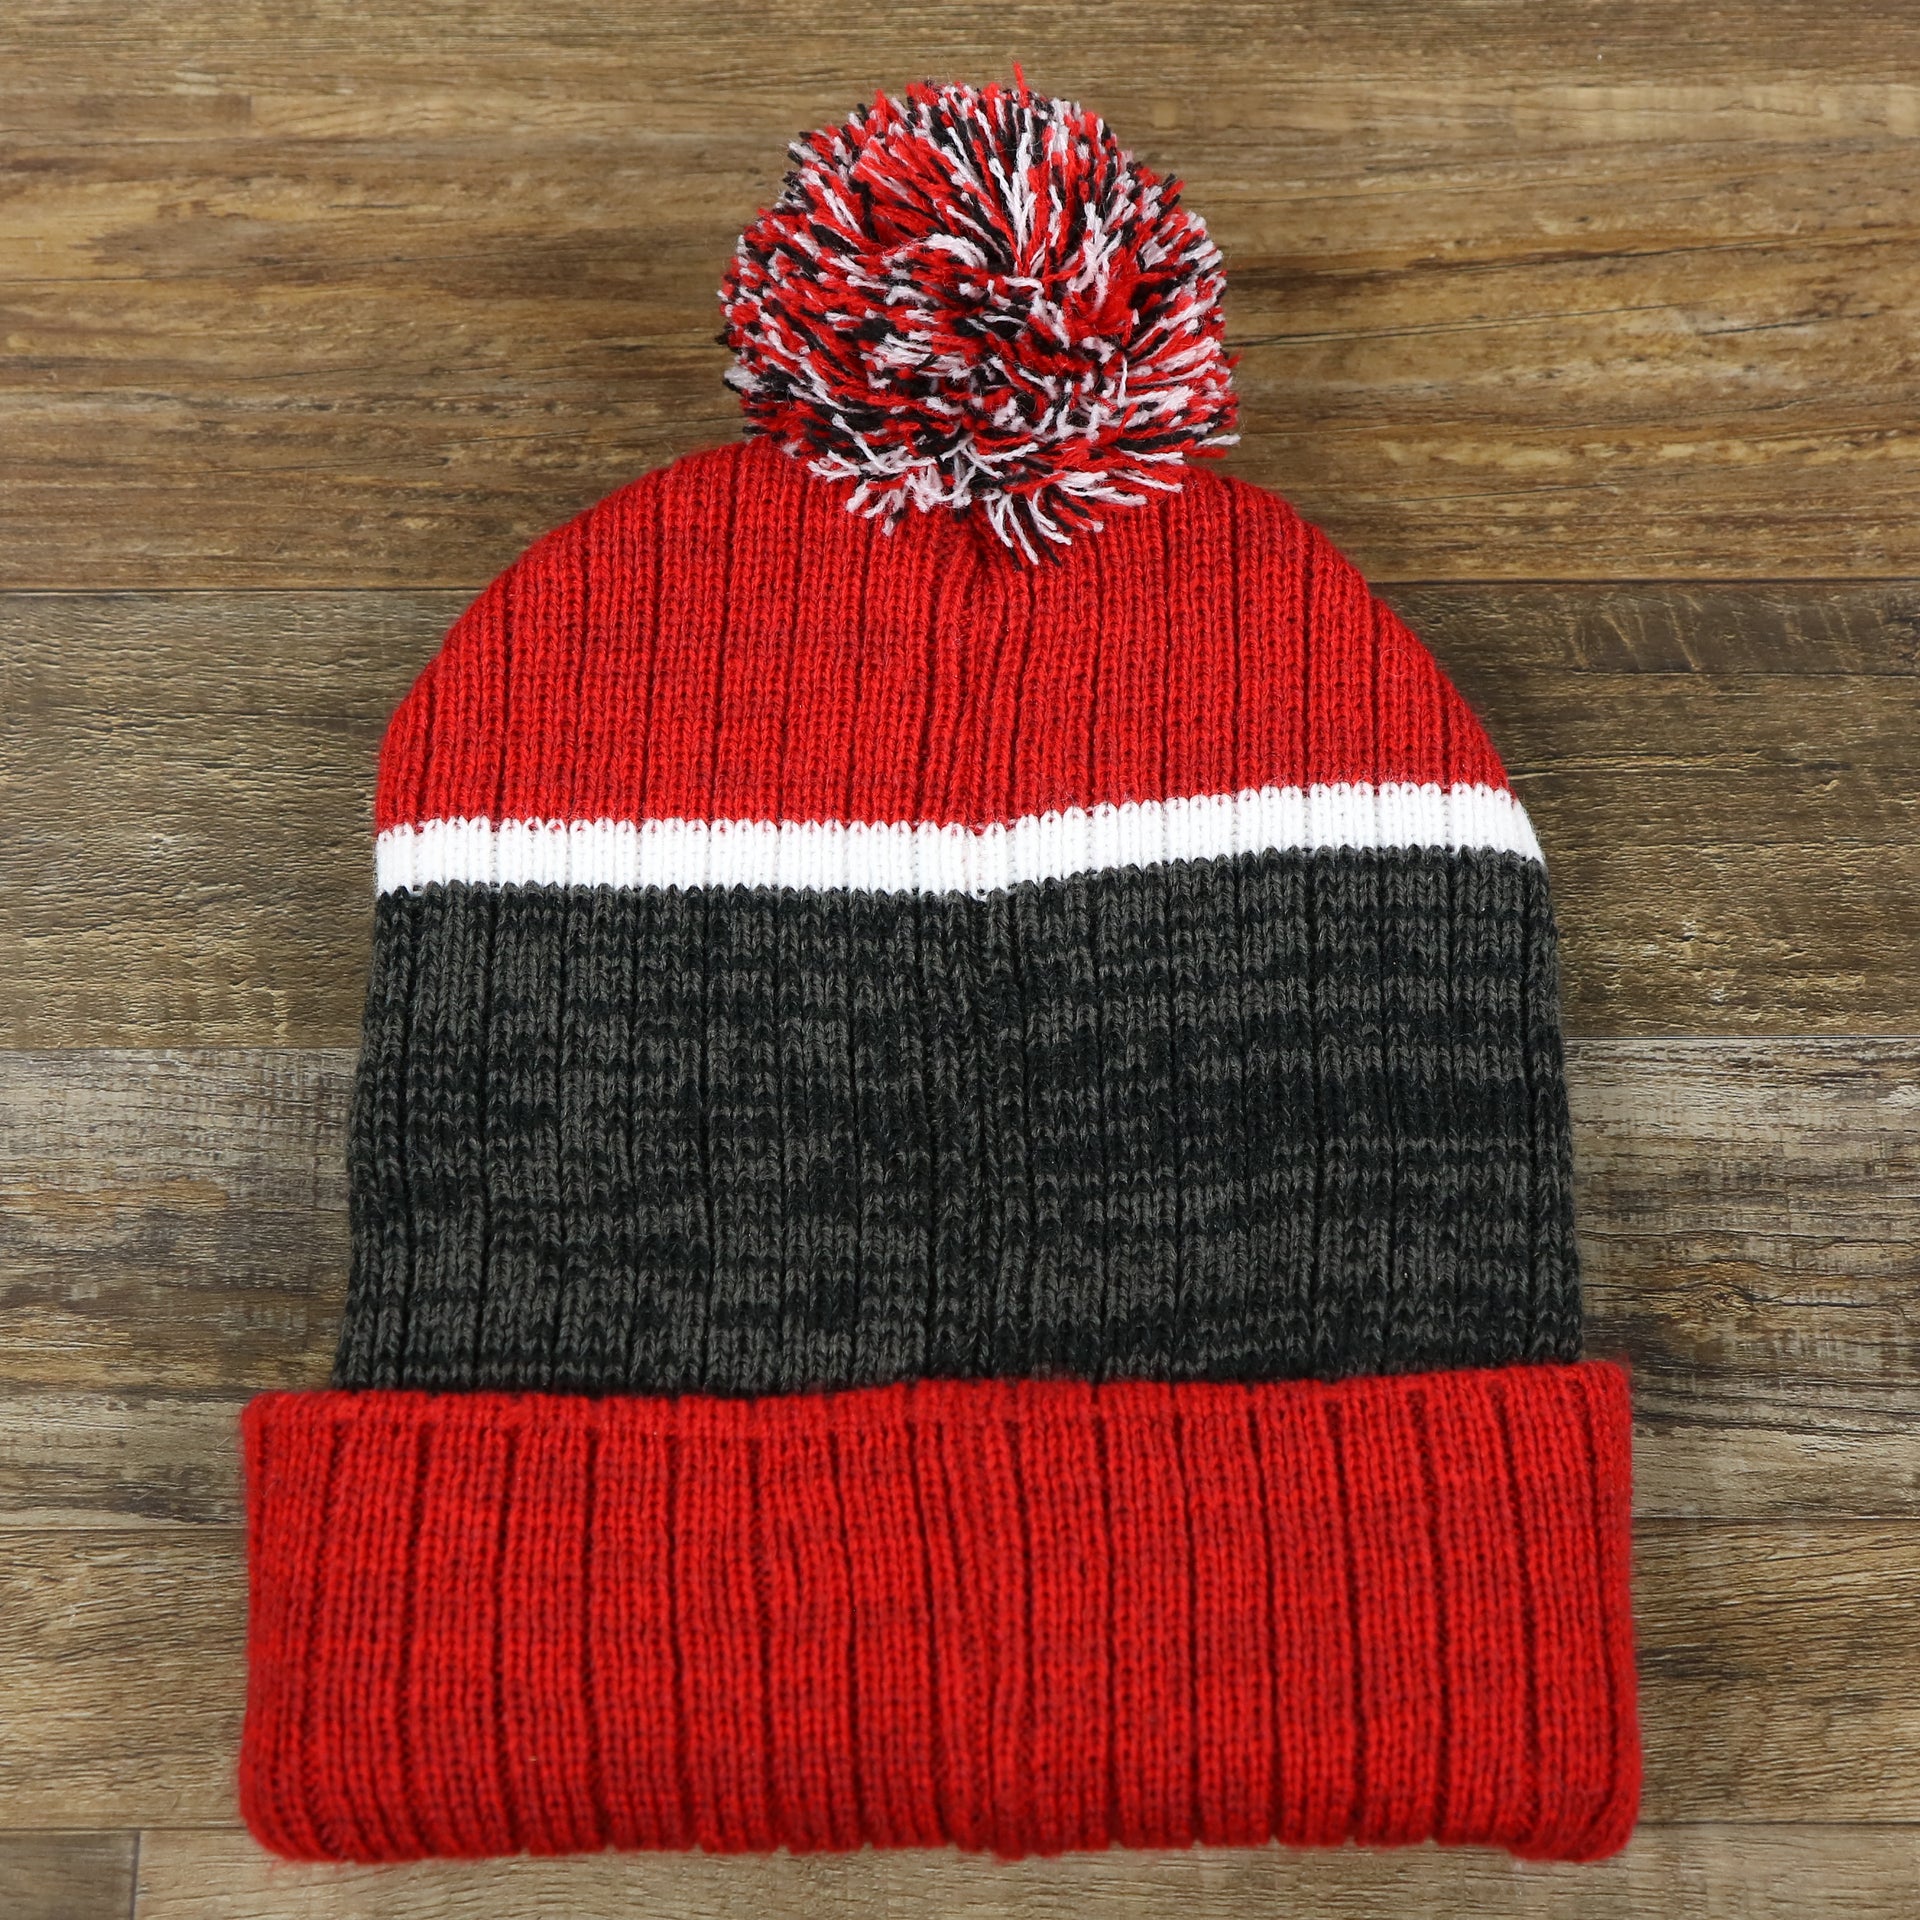 The backside of the New Jersey Devils Cuffed Logo Striped Winter Beanie With Pom Pom | Red and Gray Winter Beanie